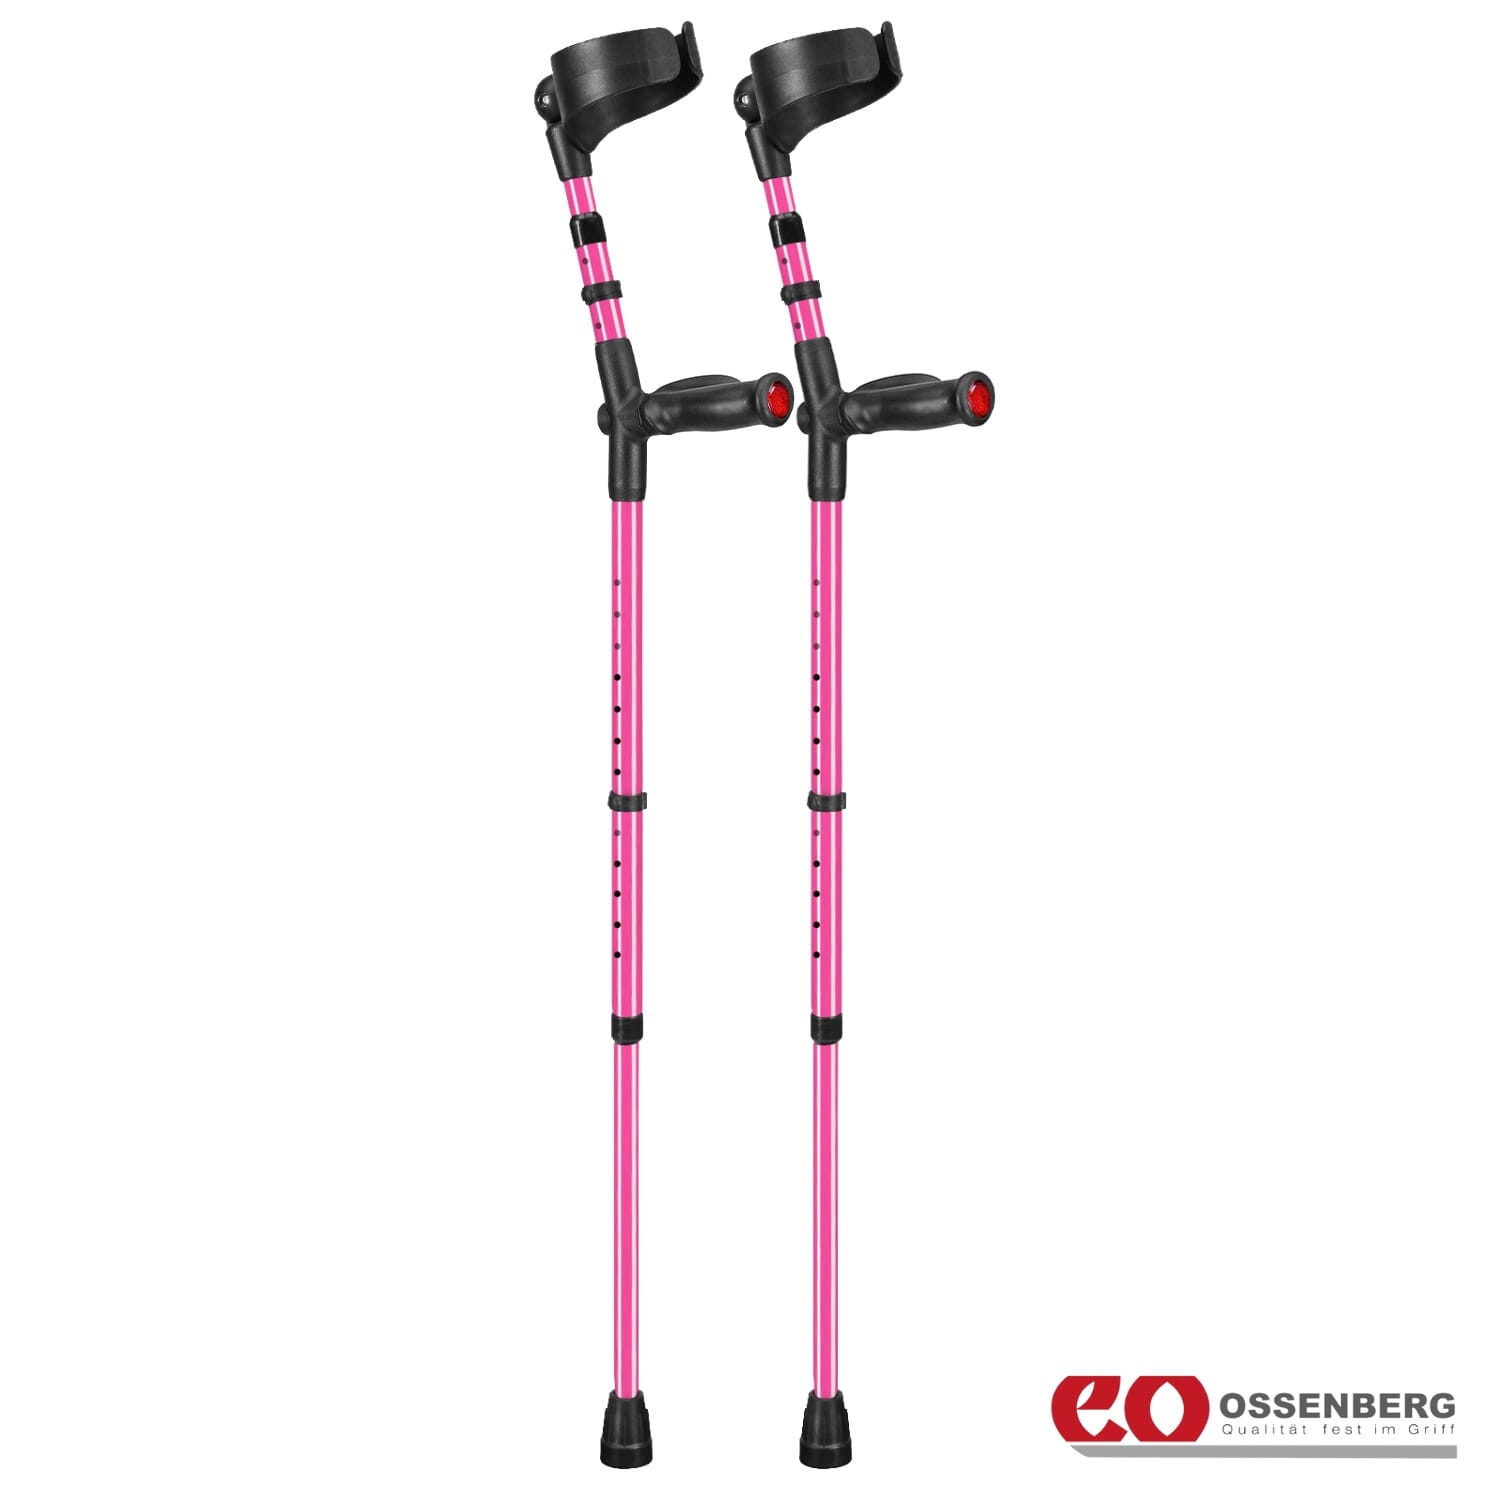 View Ossenberg Comfort Grip Double Adjustable Crutches Pink Pair information